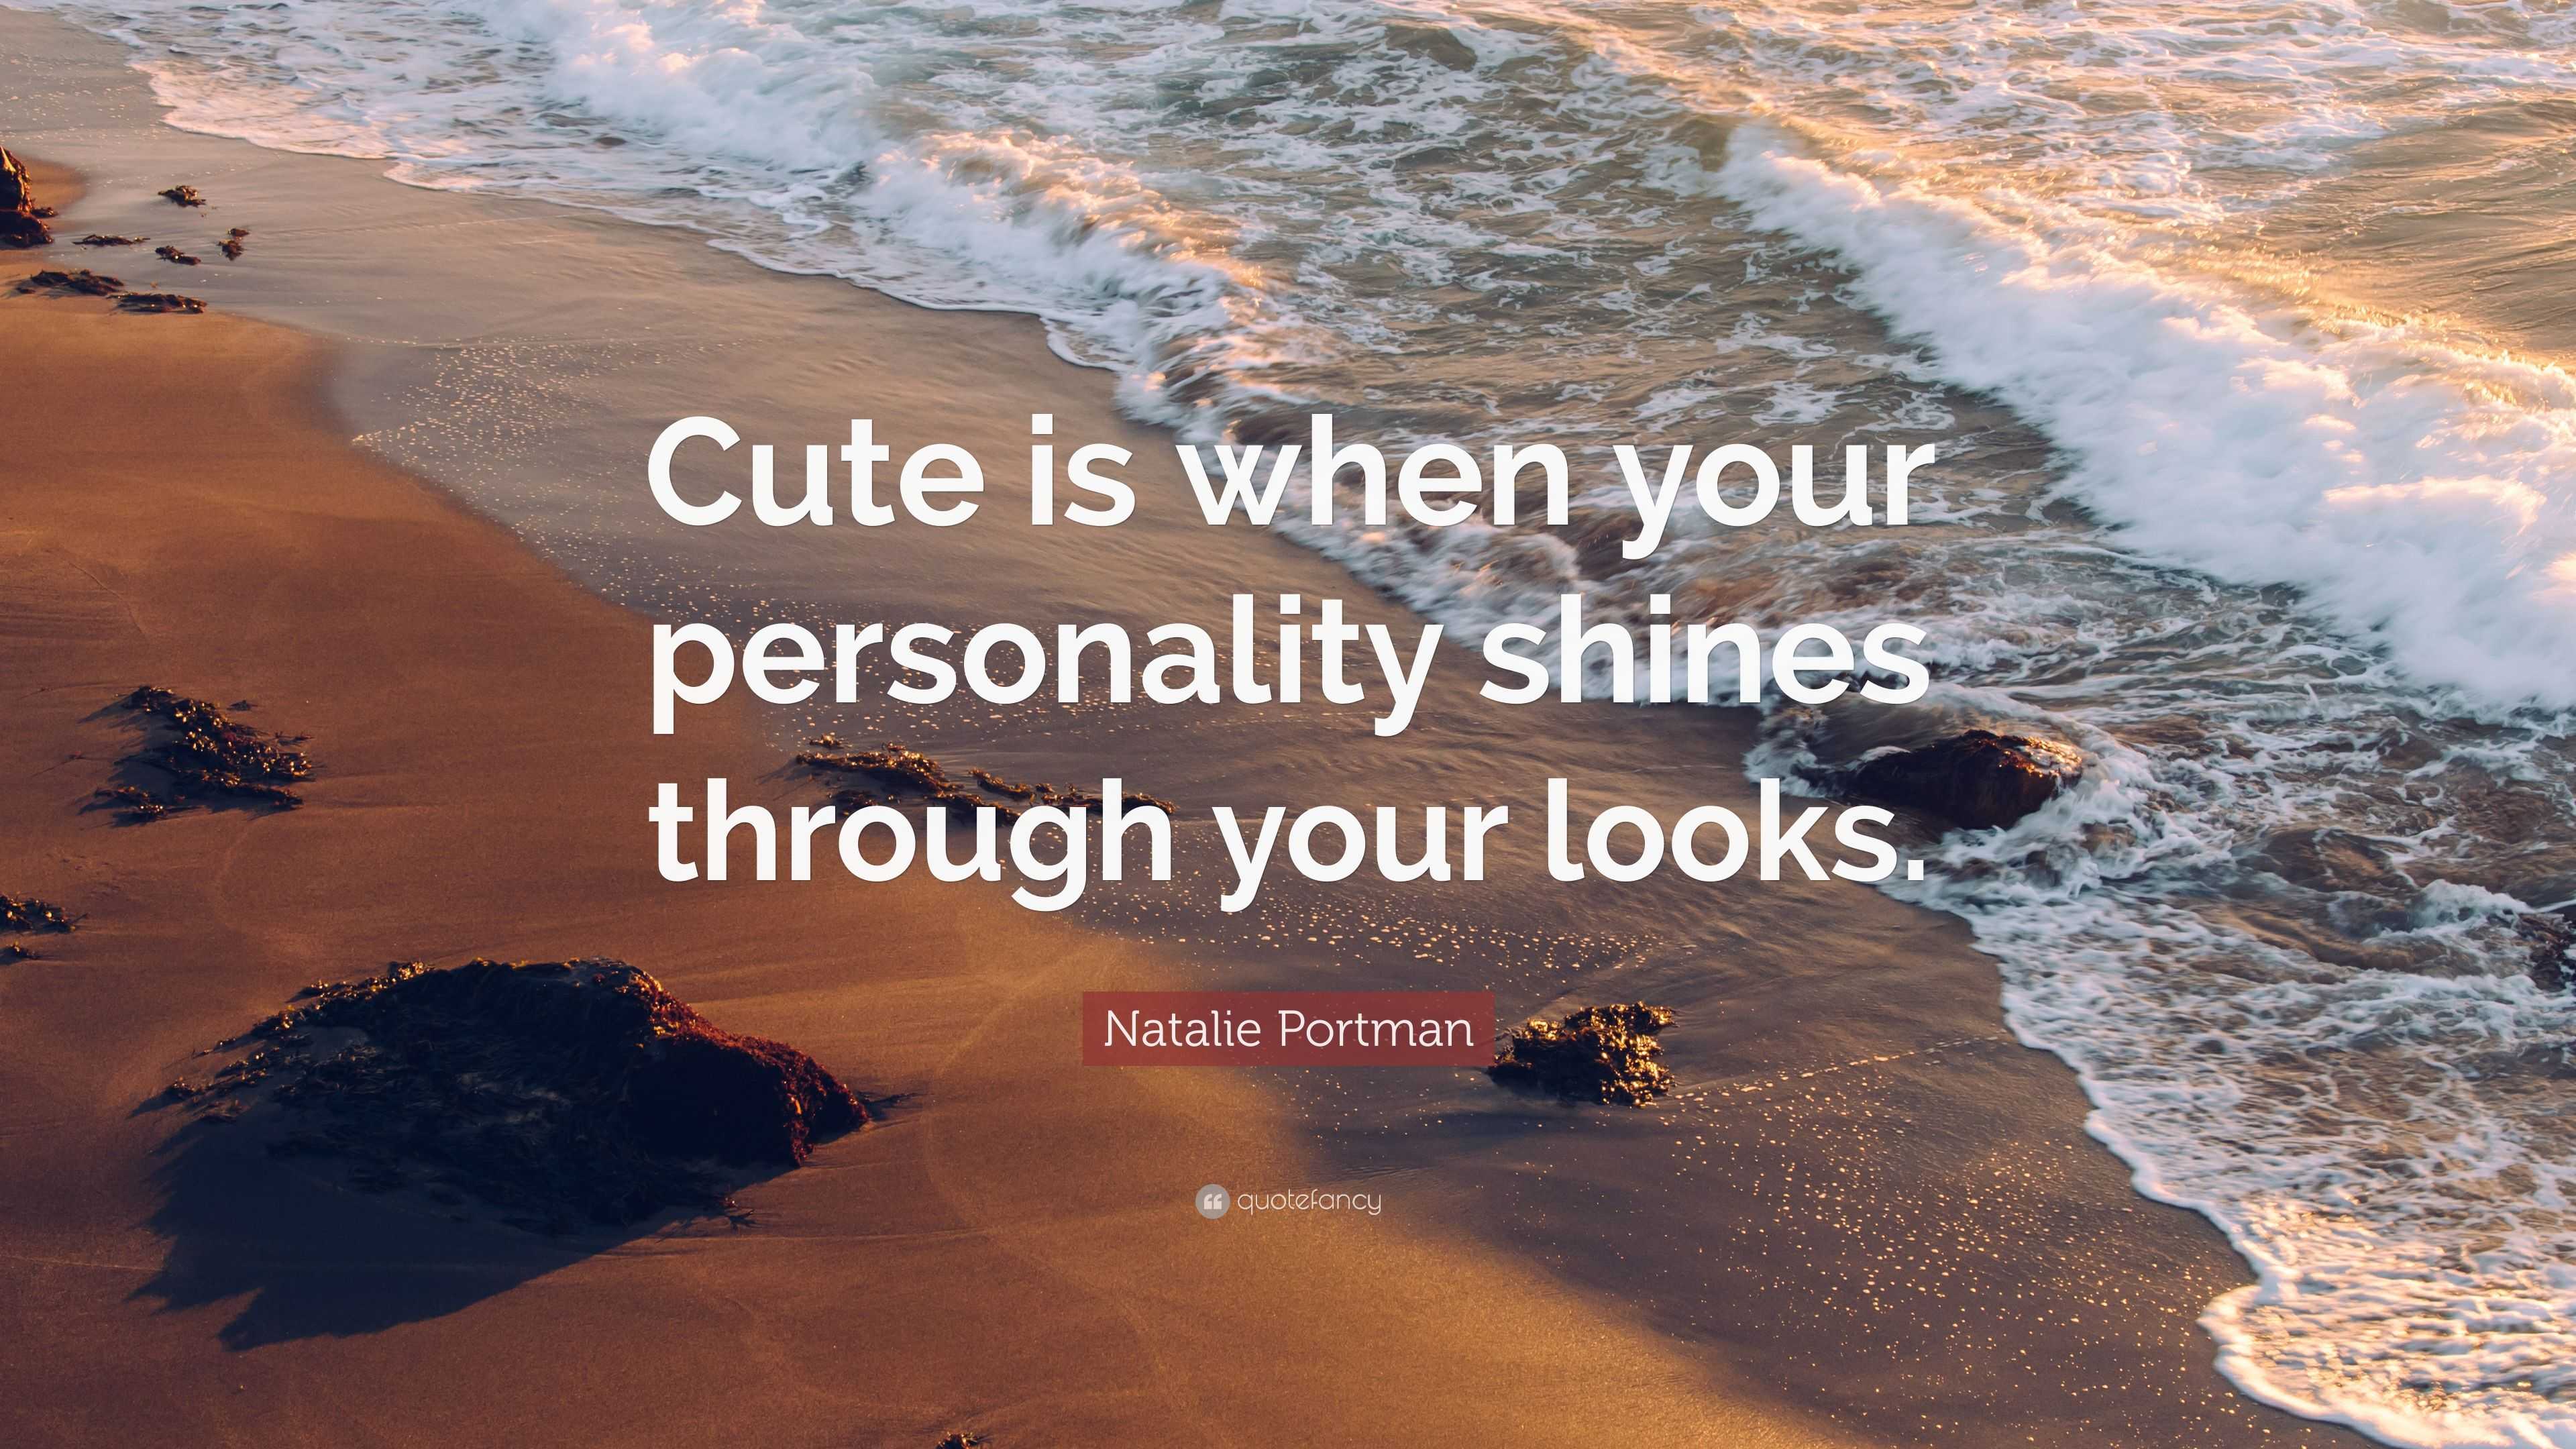 Natalie Portman Quote: “Cute is when your personality shines ...